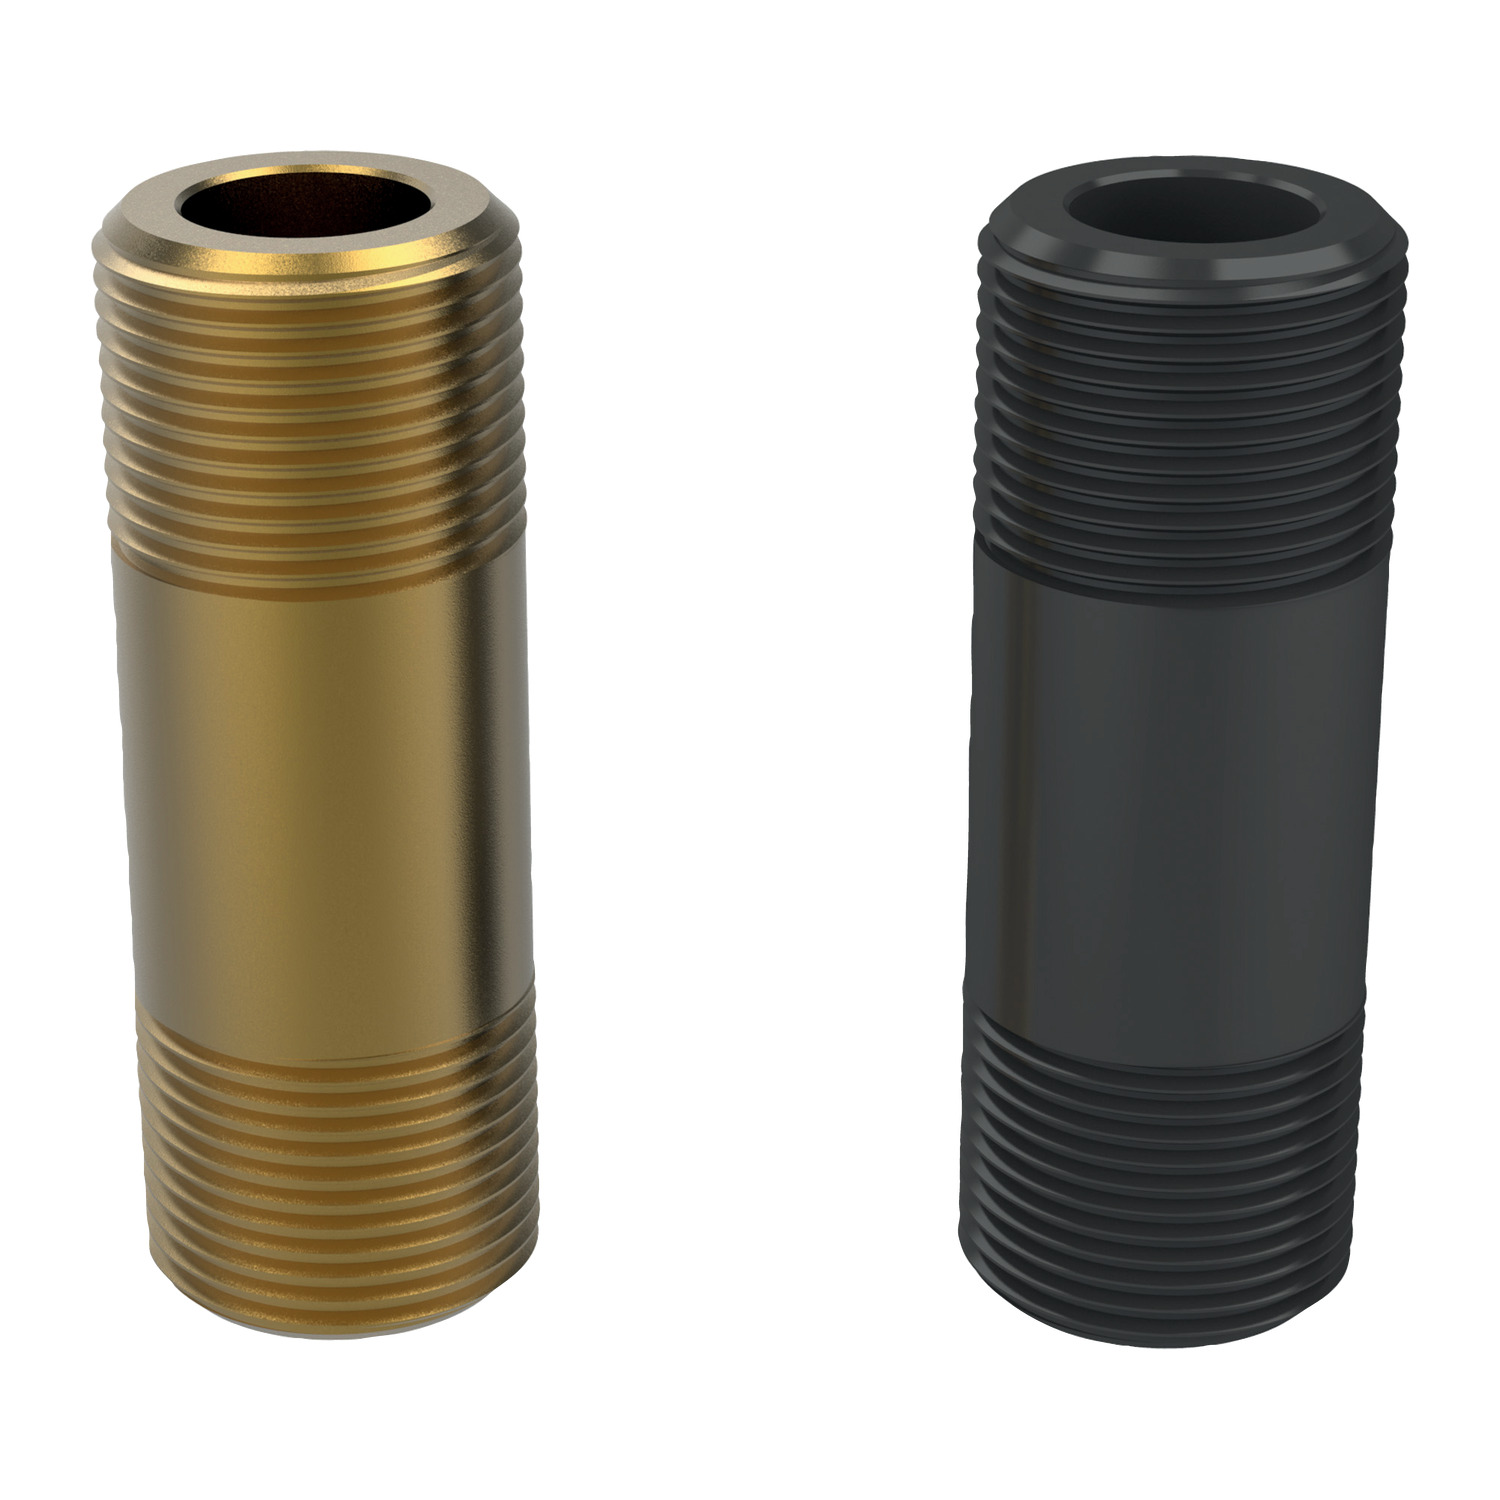 20034.W3370-A Dual Fit Fittings - Acetal or Brass. Dual Fit Fittings - Acetal or Brass.